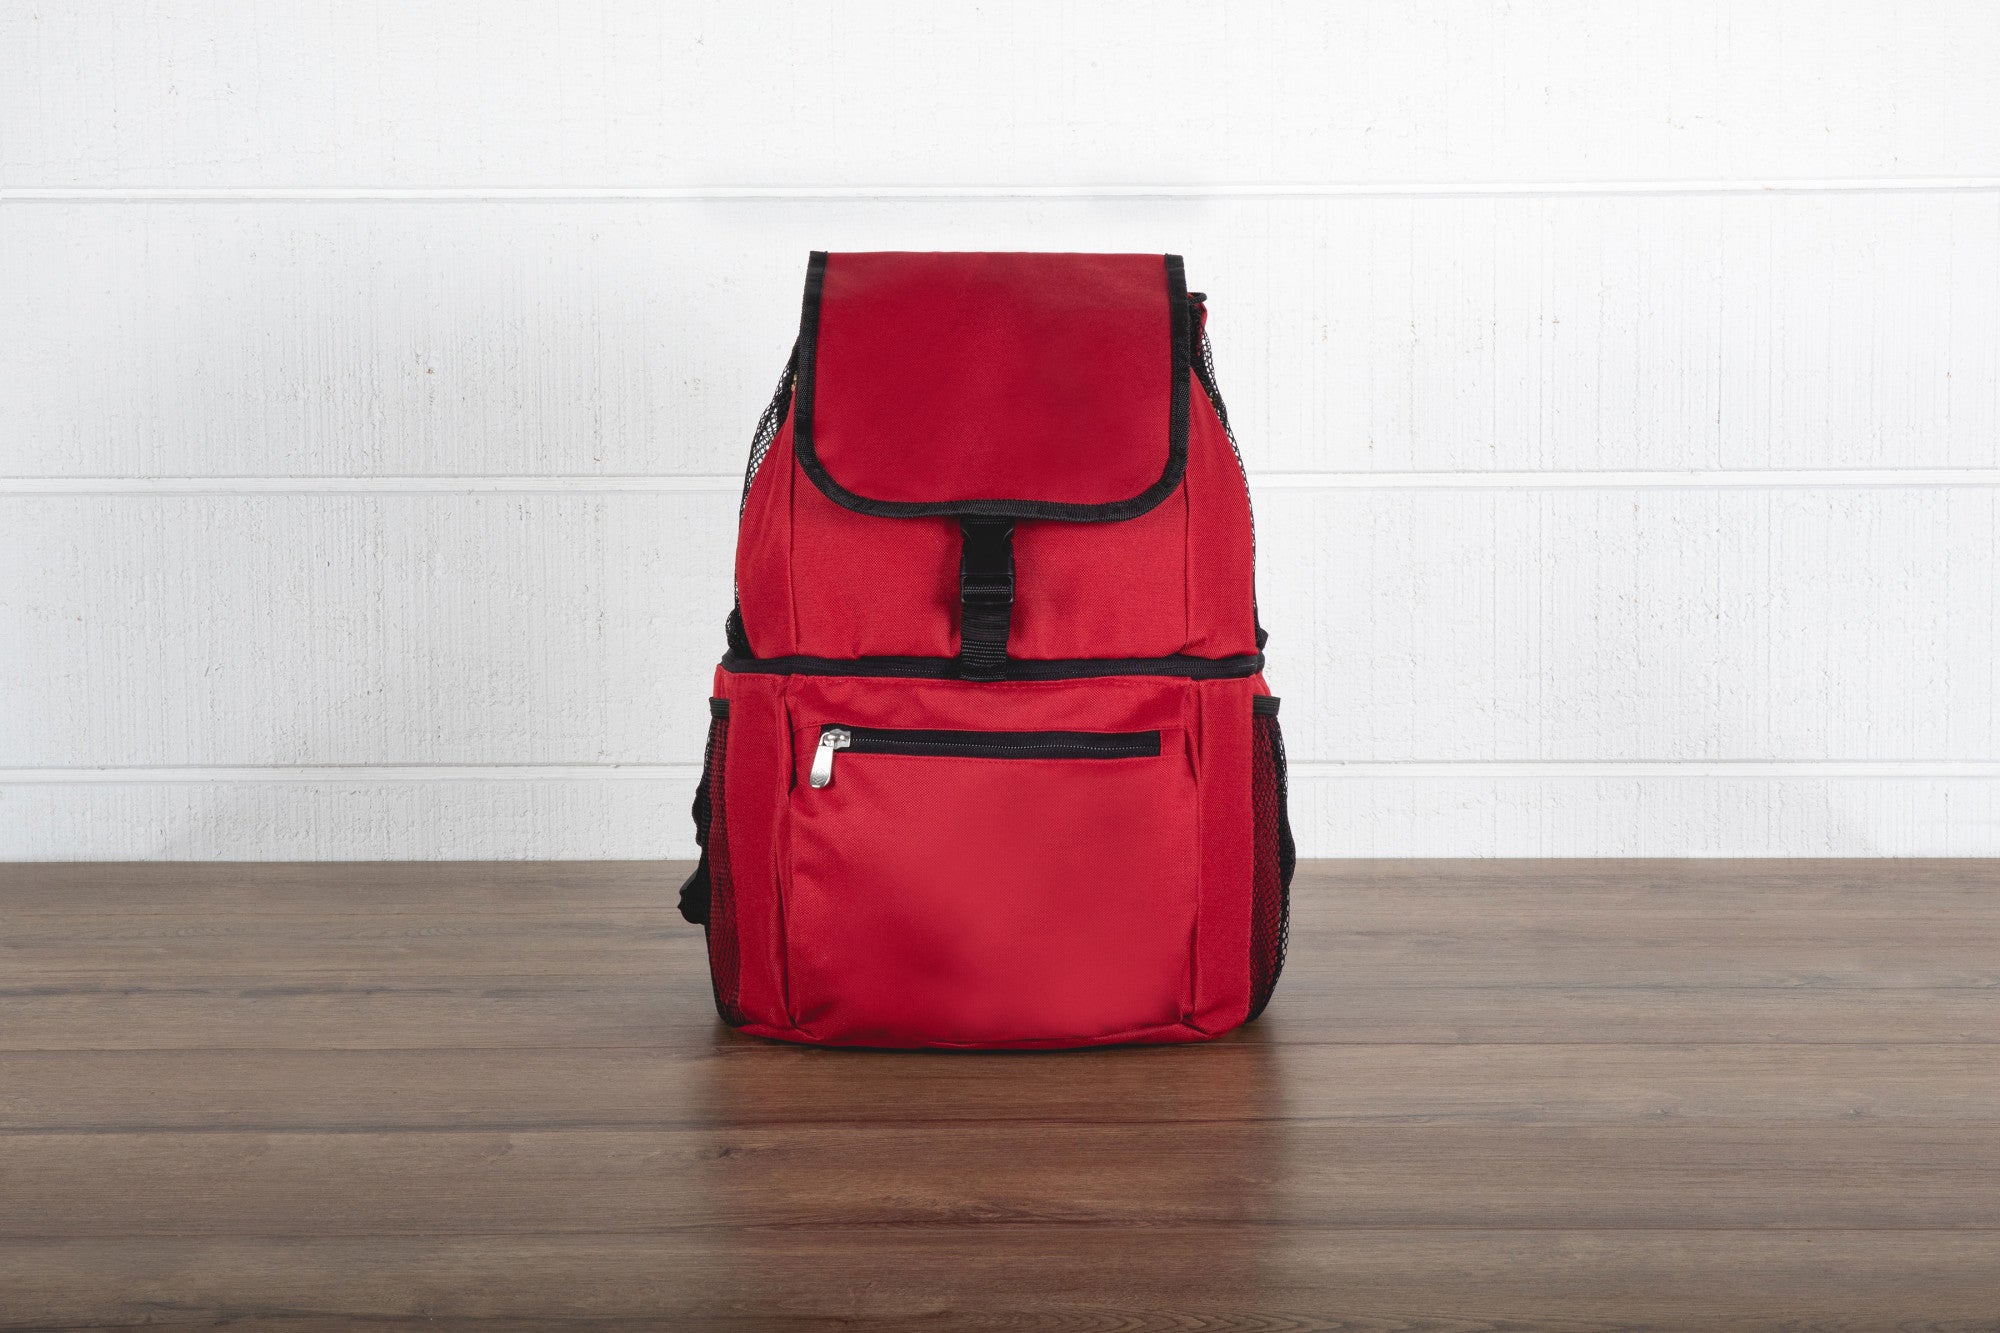 Detroit Red Wings - Zuma Backpack Cooler